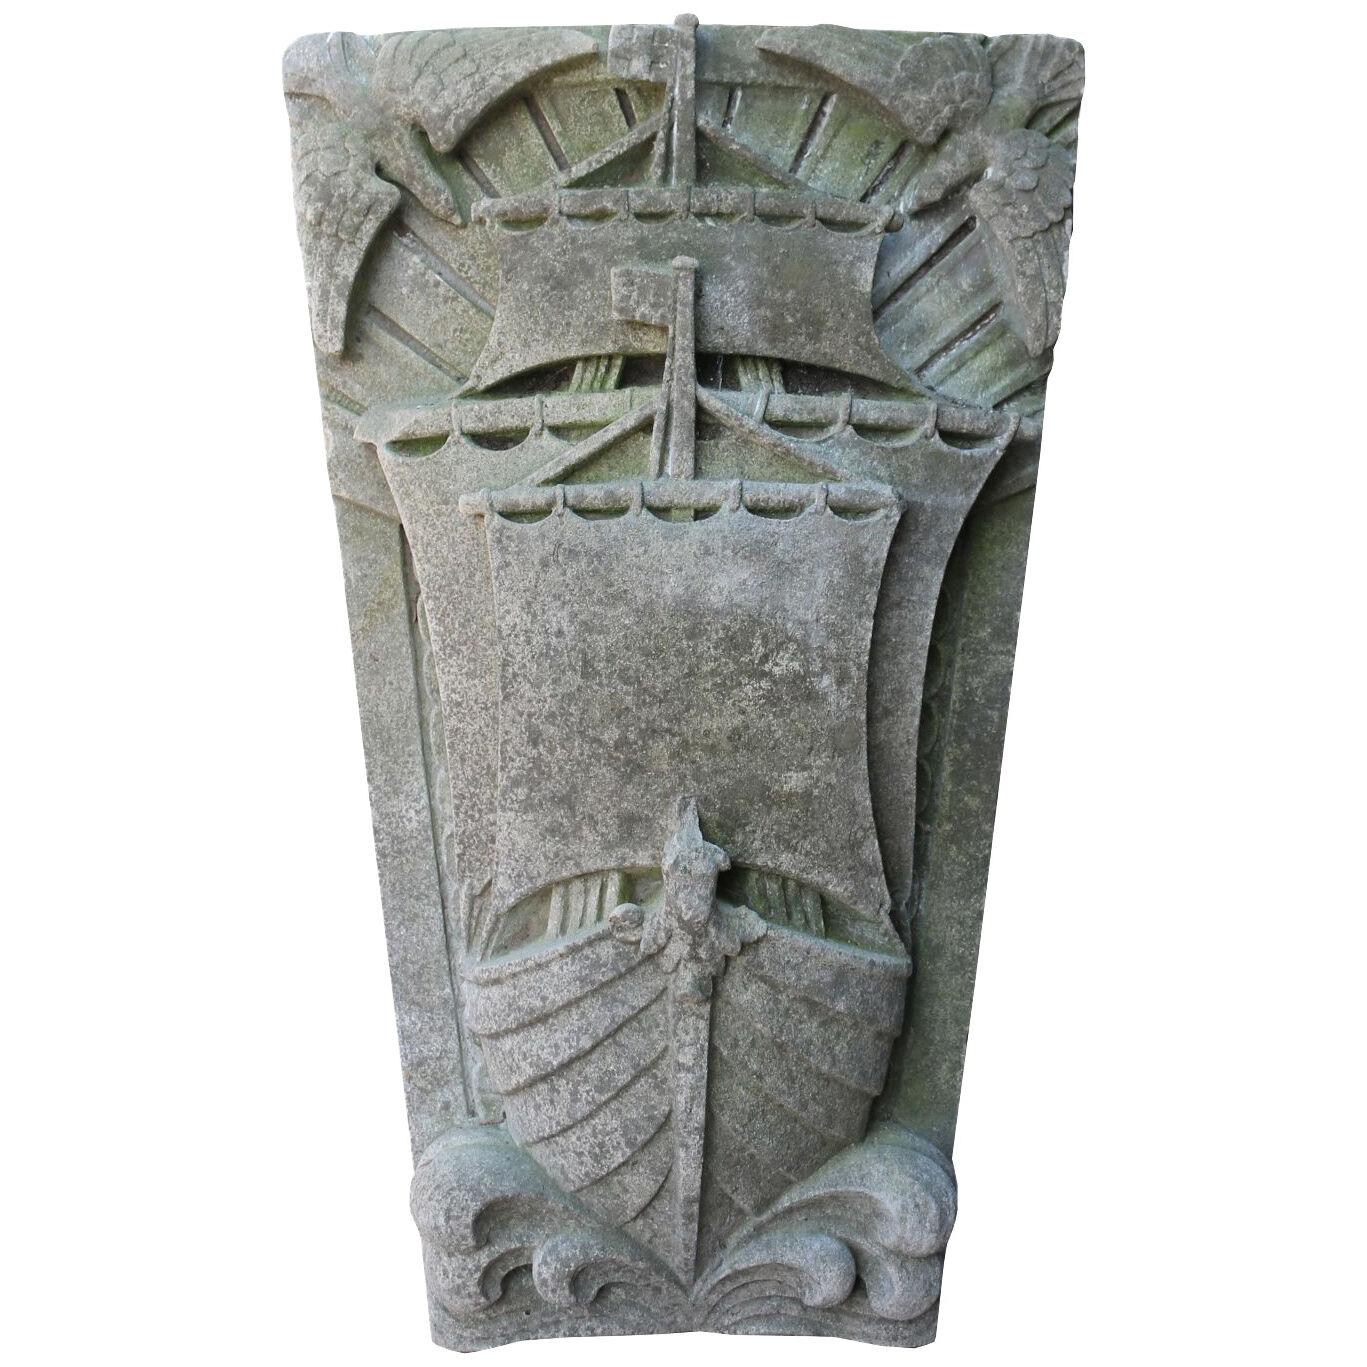 Antique Key Stone Depicting A Galleon